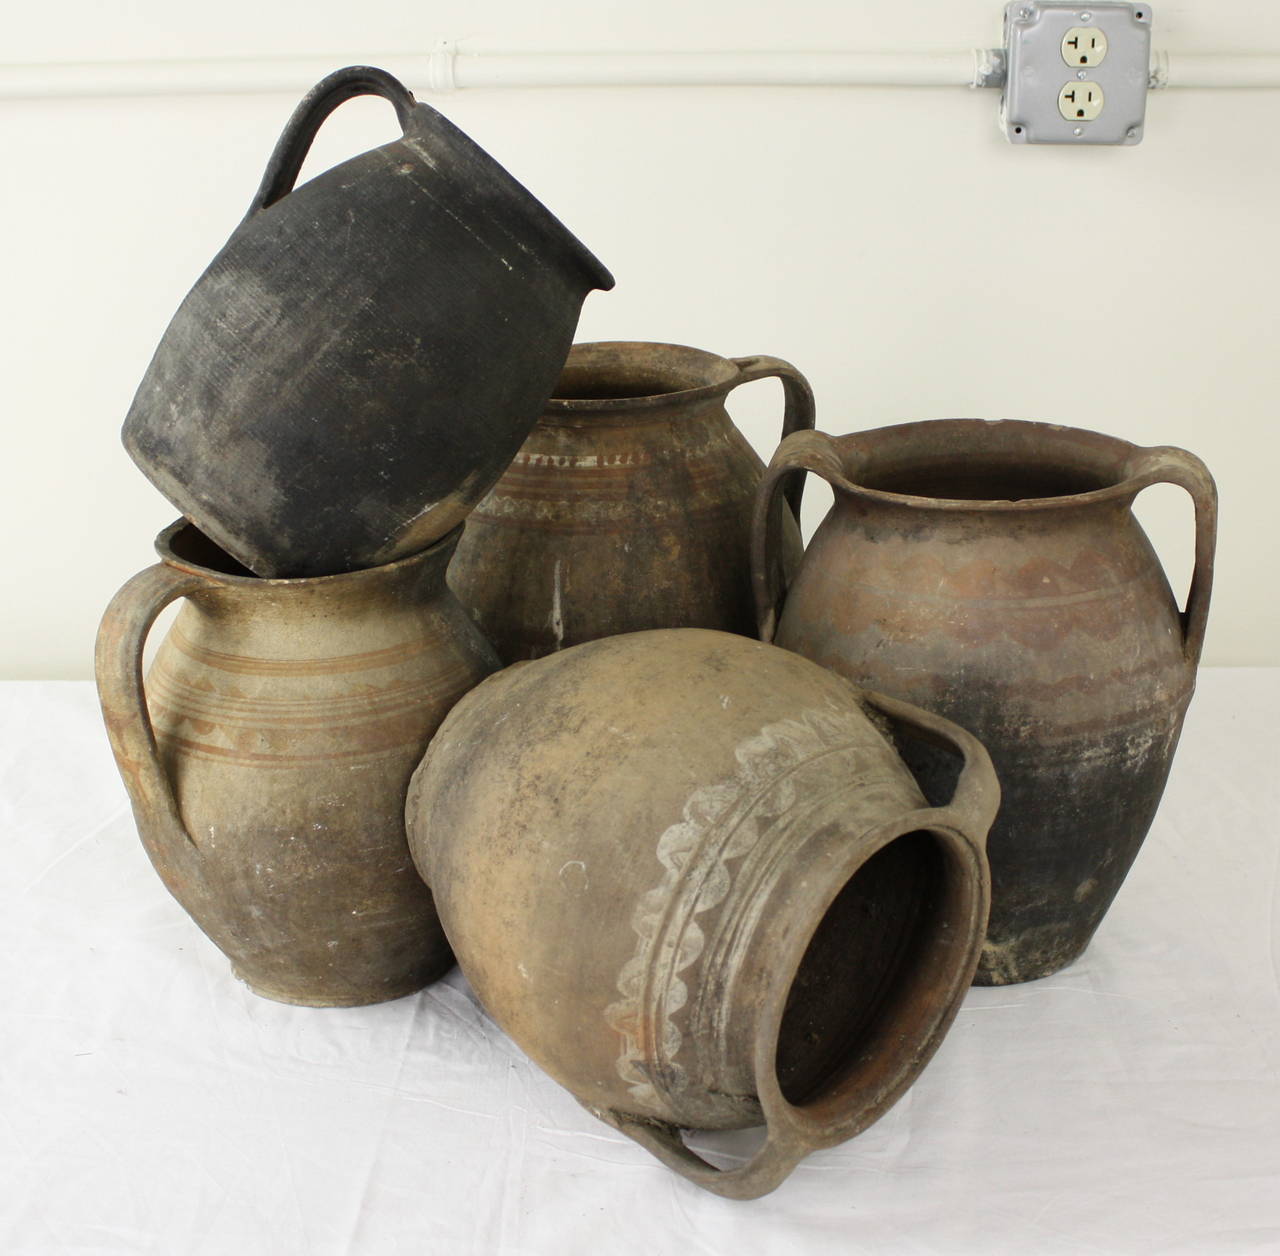 A very interesting rustic collection of jugs, great on top of a cabinet or armoire. Measurement below is for the largest jug. The smallest measures 7